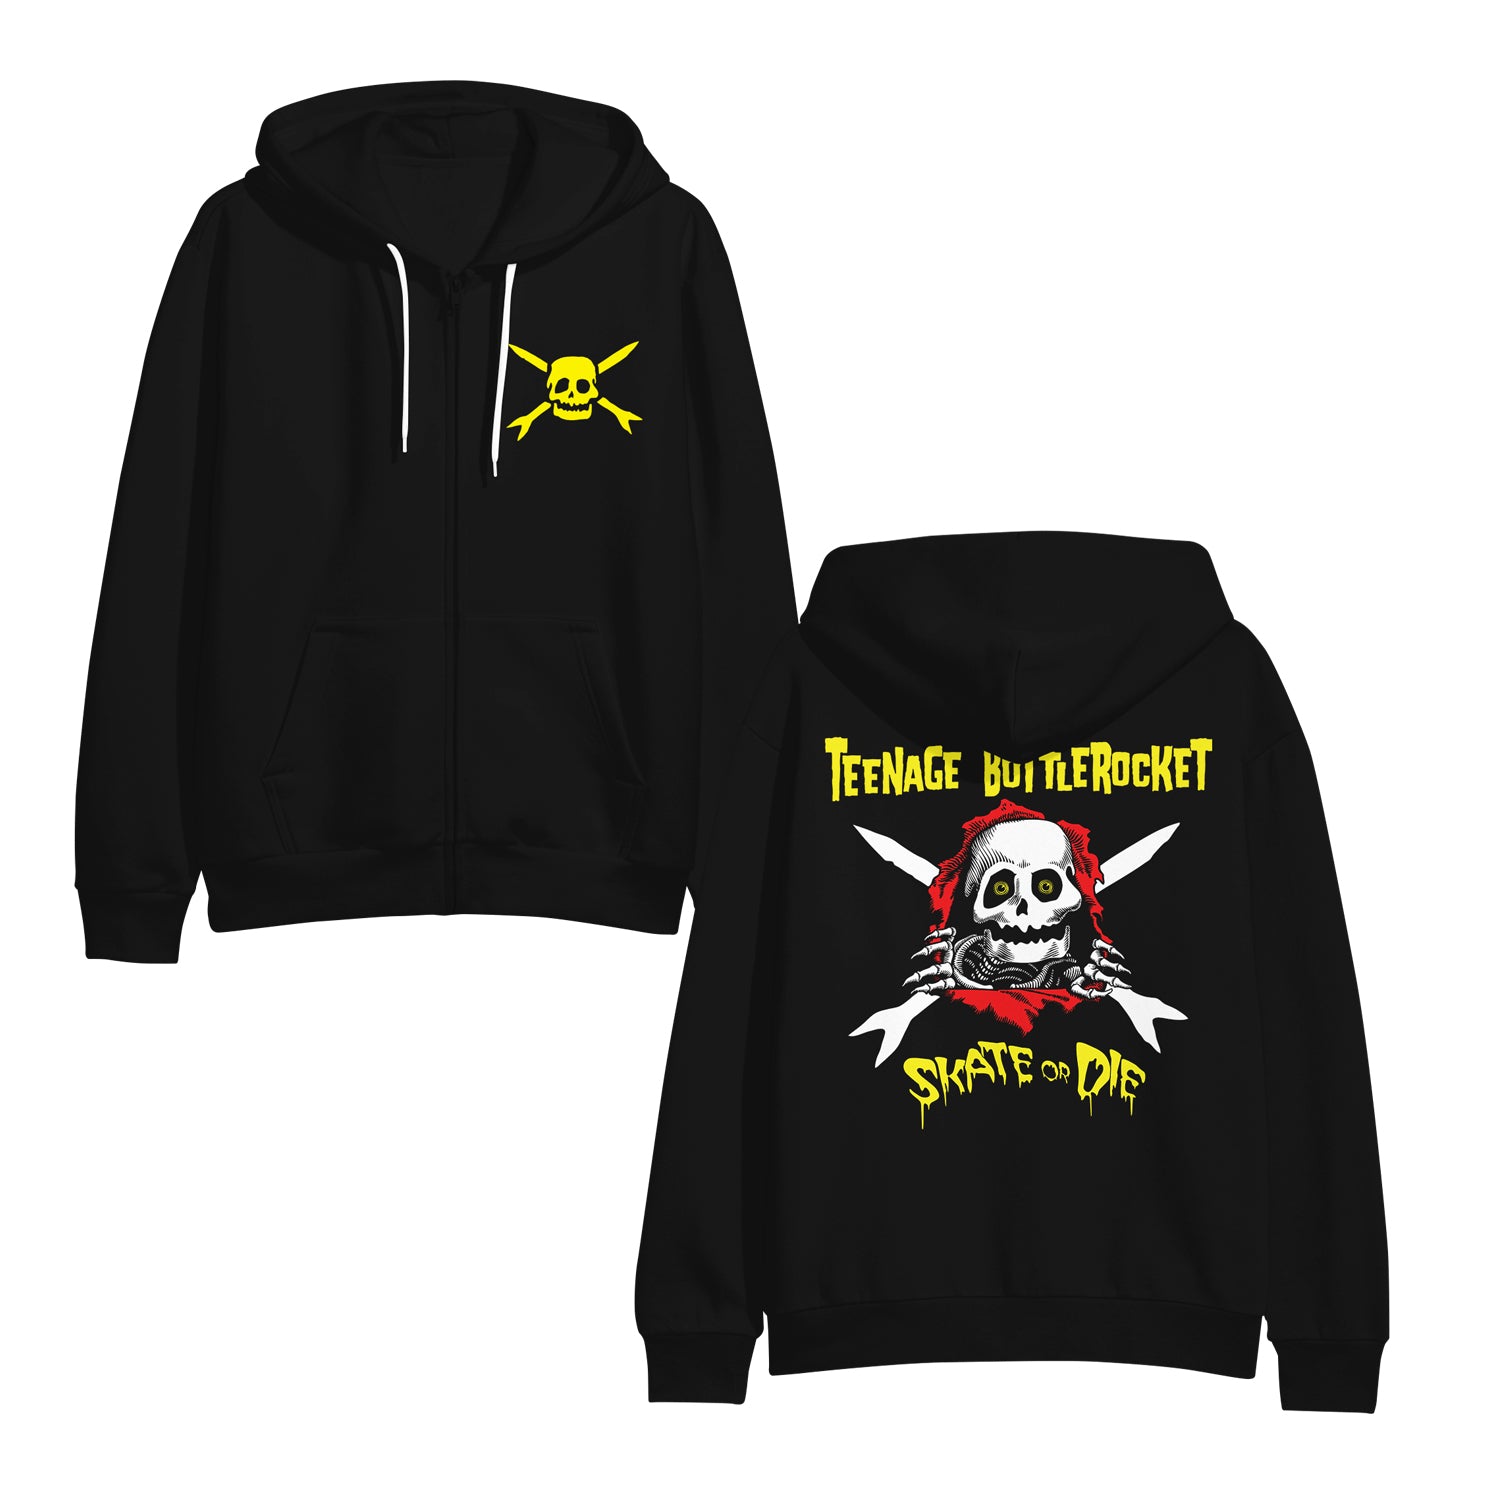 Image of the front and back of a black zip up sweatshirt against a white background. The left chest has the teenage bottlerocket logo in yellow- a skull head with cross arrows. The hoodie has white strings. The back of the hoodie says teenage bottlerocket across the shoulder area in yellow. Below that is an image of a skeleton's face that popped out of a red hole and it has its hands on the edges of it. There are cross arrows in white behind the skeleton. Below this is yellow text that says skate or die.